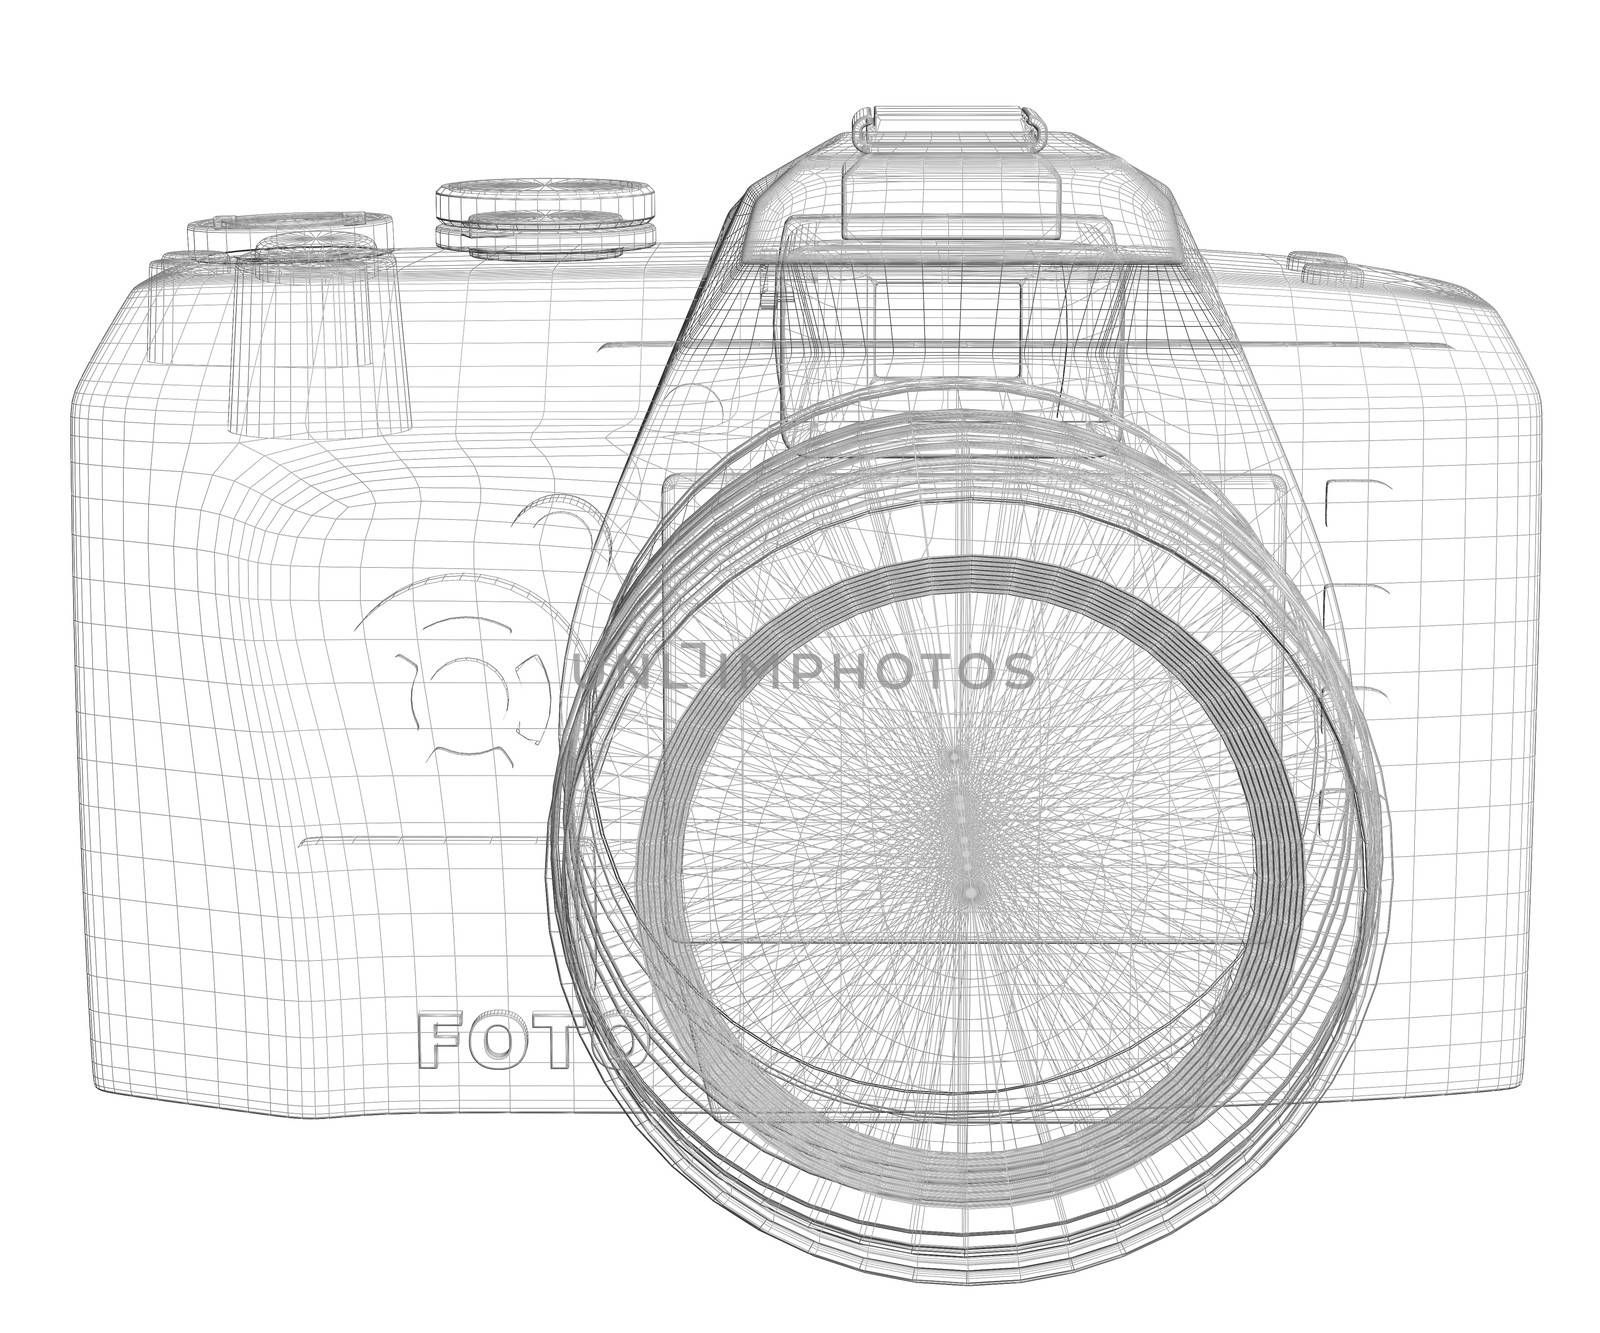 SLR camera. Wire frame. Isolated render on a white background